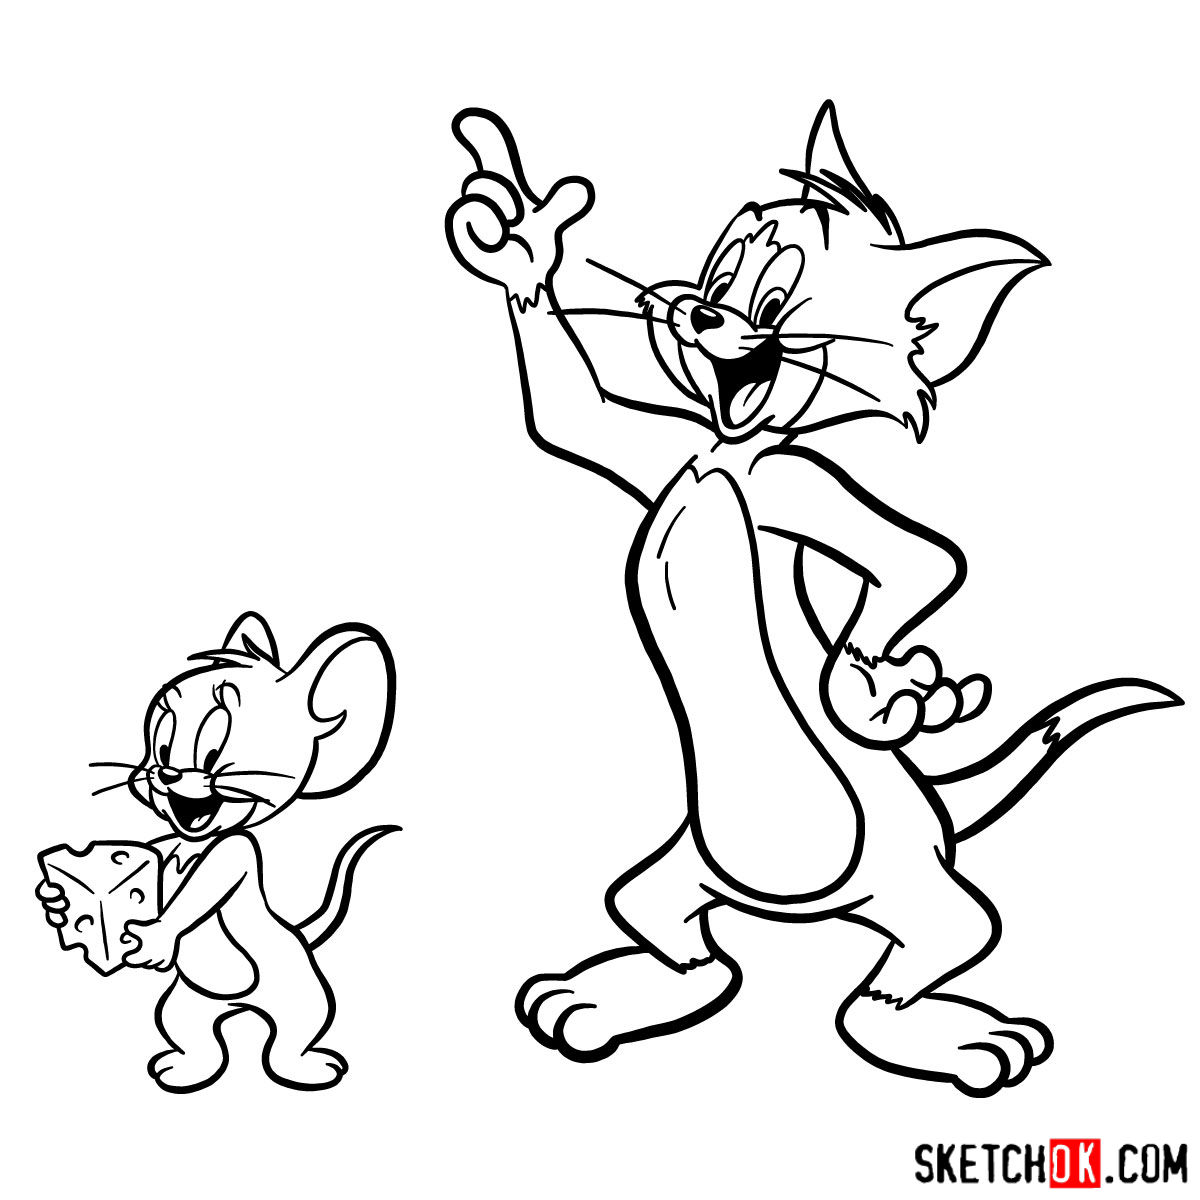 How to draw Tom and Jerry together - step 20